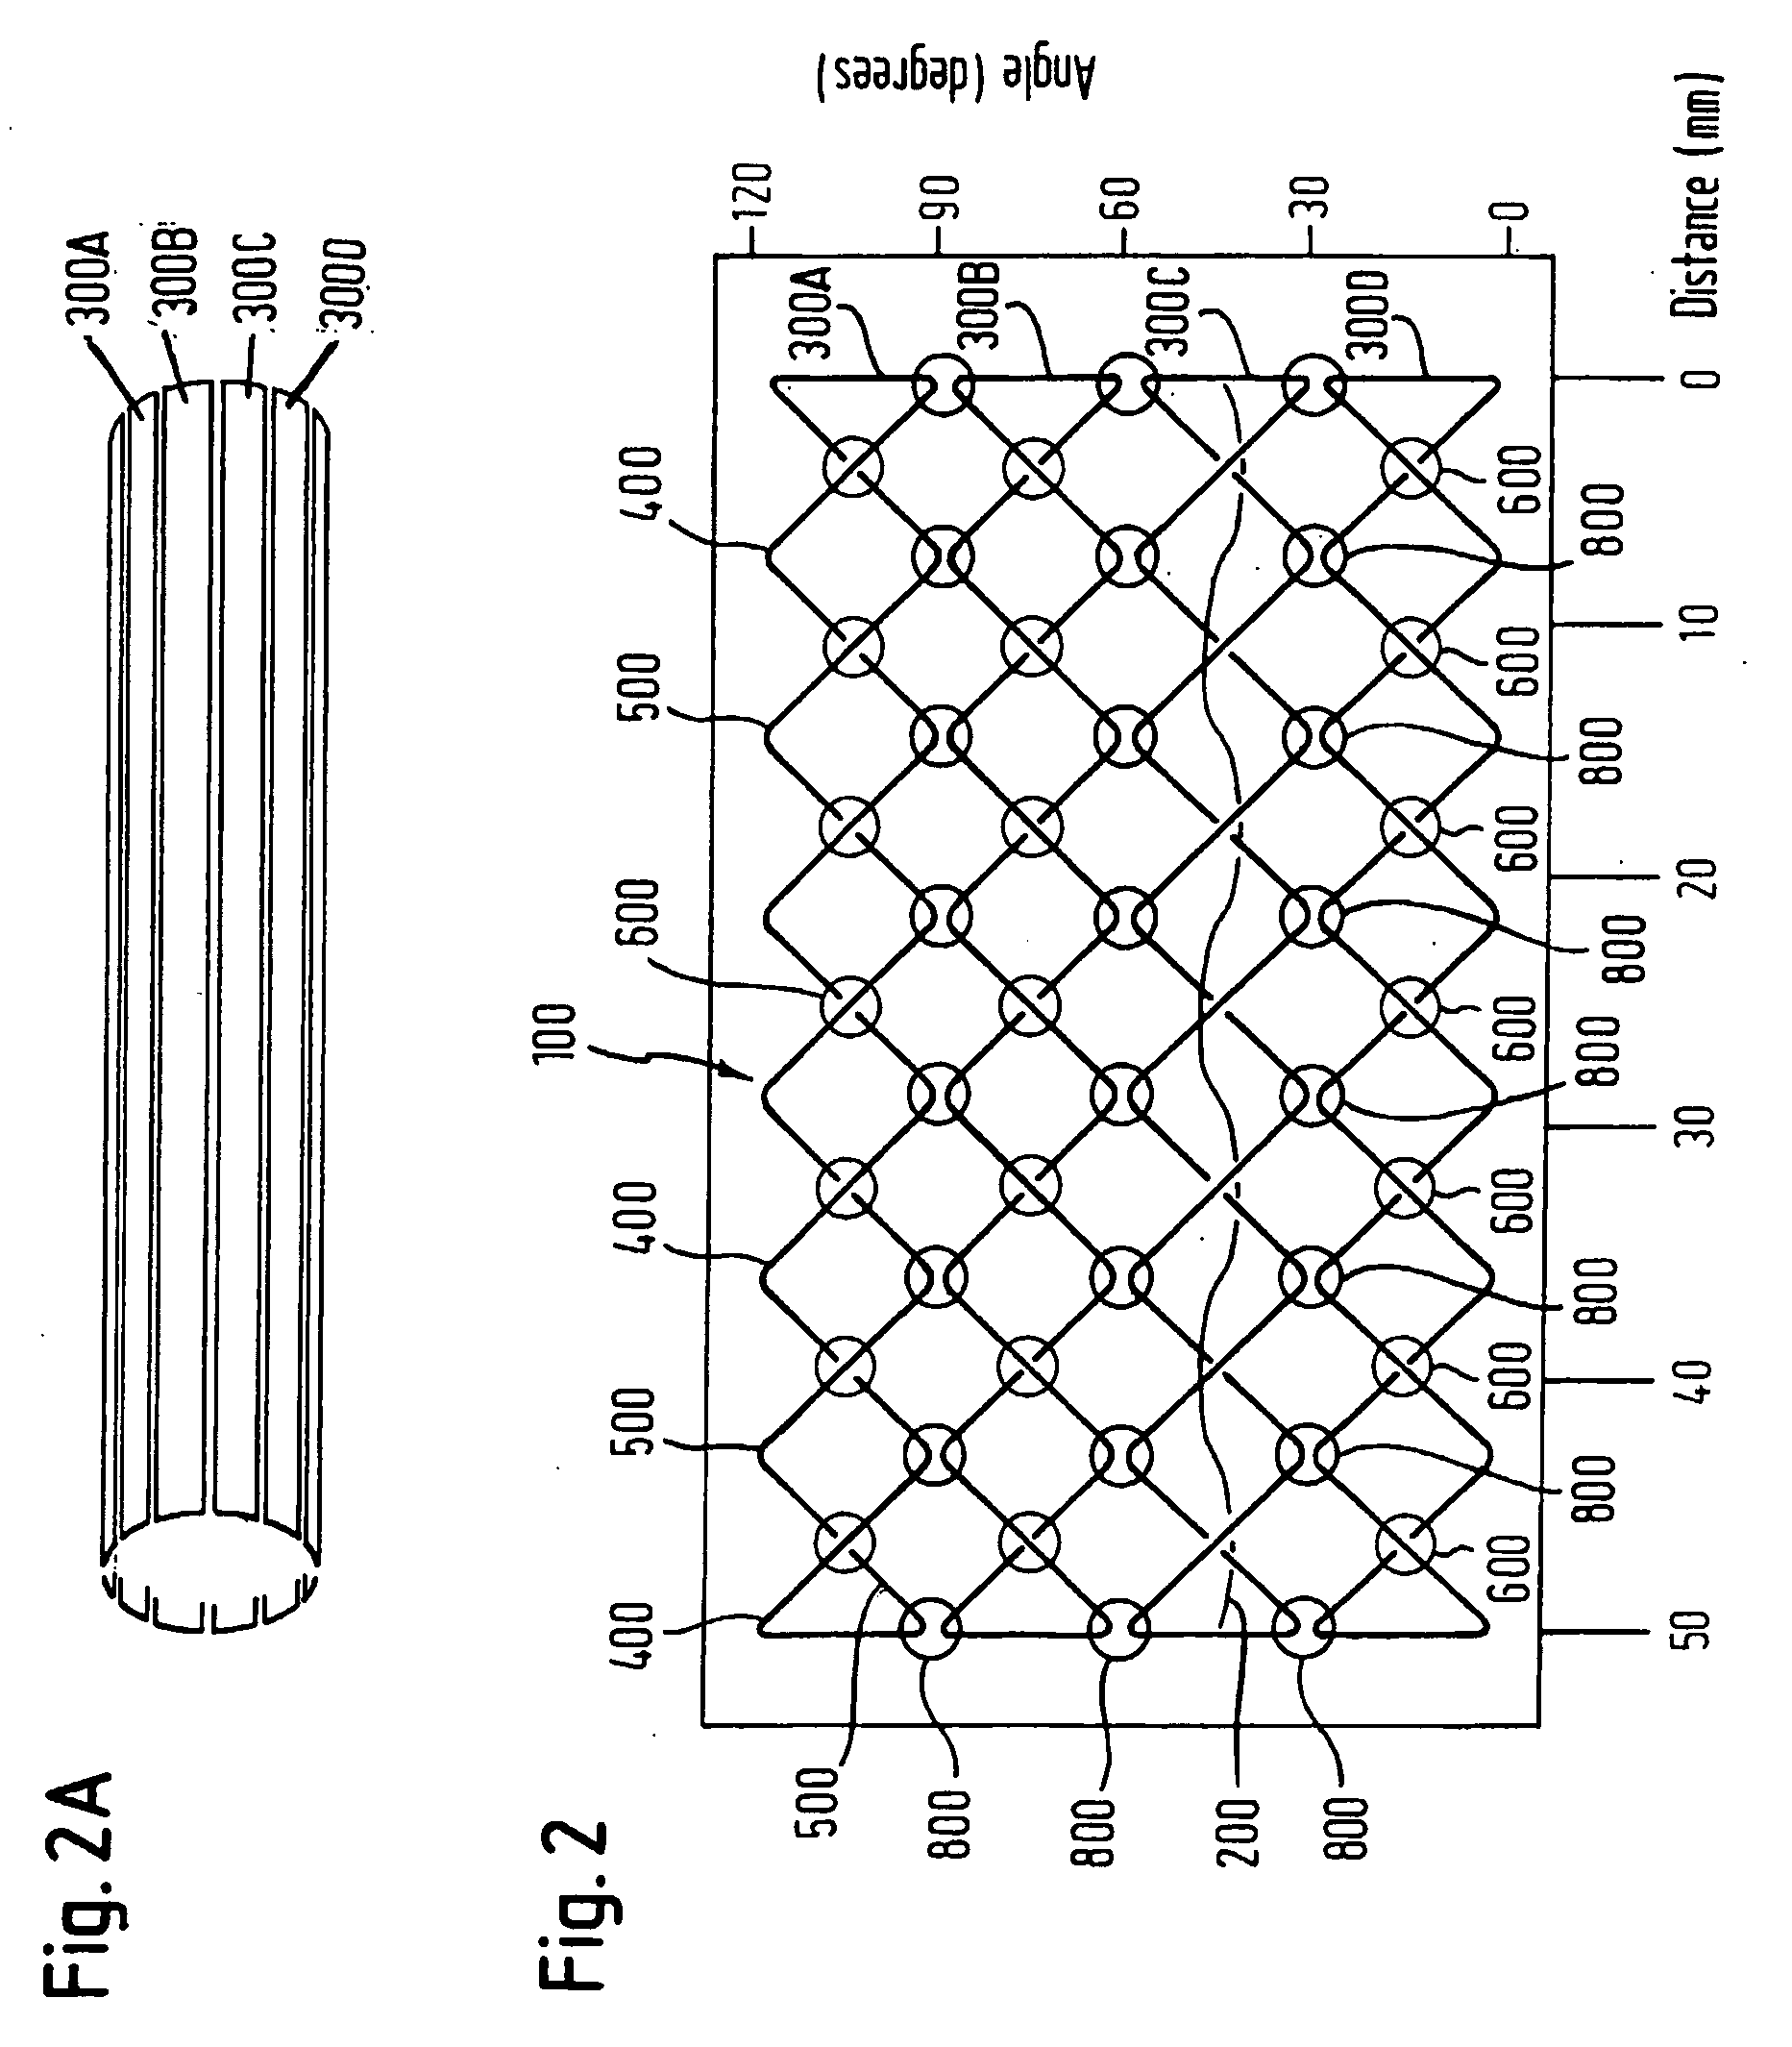 Mri Compatible Implant Comprising Electrically Conductively Closed Loops